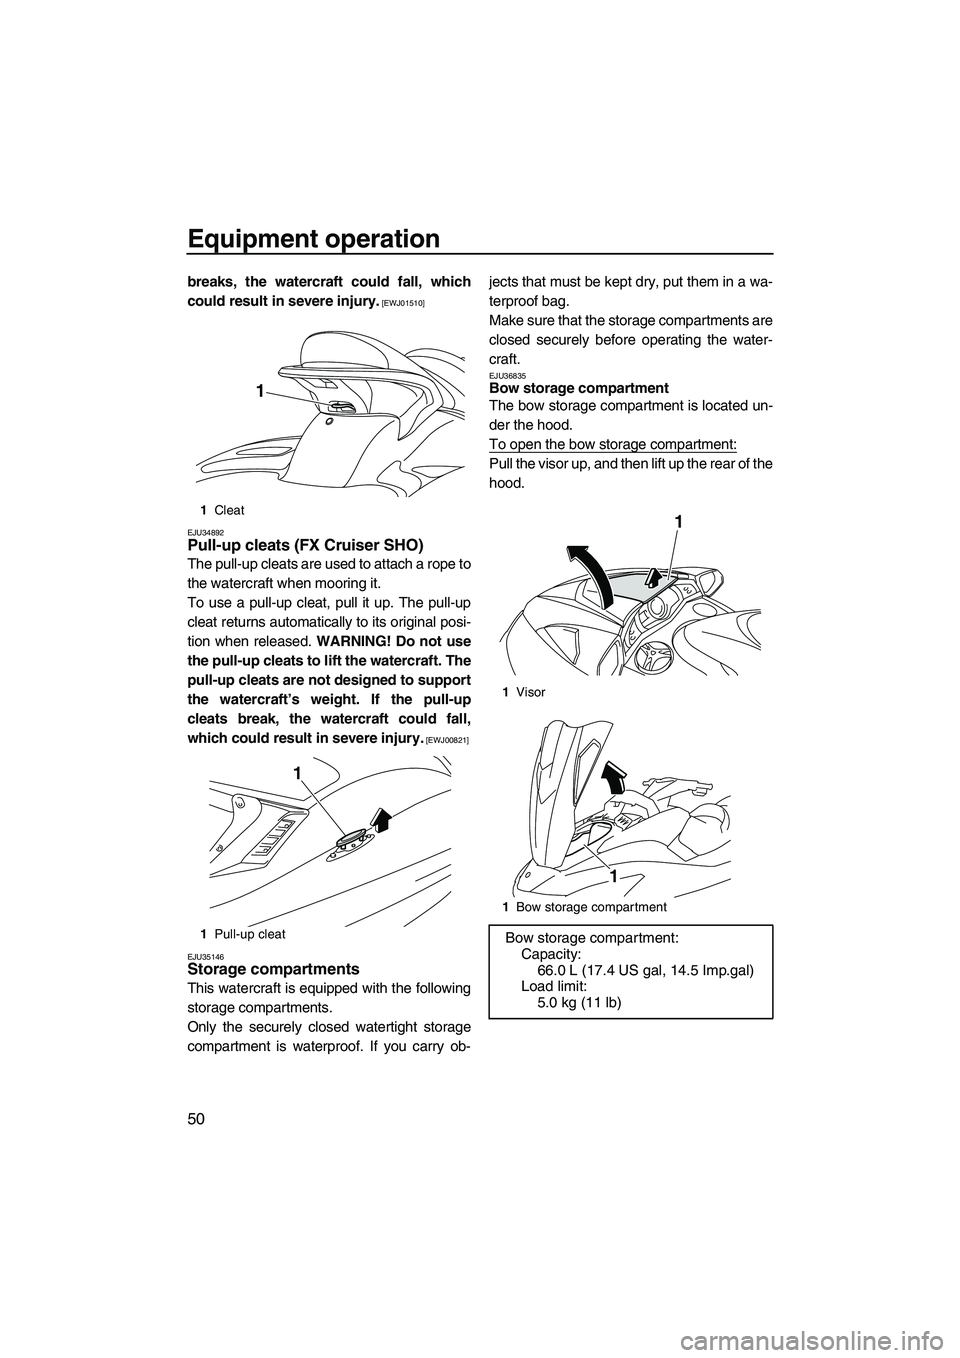 YAMAHA SVHO 2011  Owners Manual Equipment operation
50
breaks, the watercraft could fall, which
could result in severe injury.
 [EWJ01510]
EJU34892
Pull-up cleats (FX Cruiser SHO) 
The pull-up cleats are used to attach a rope to
the